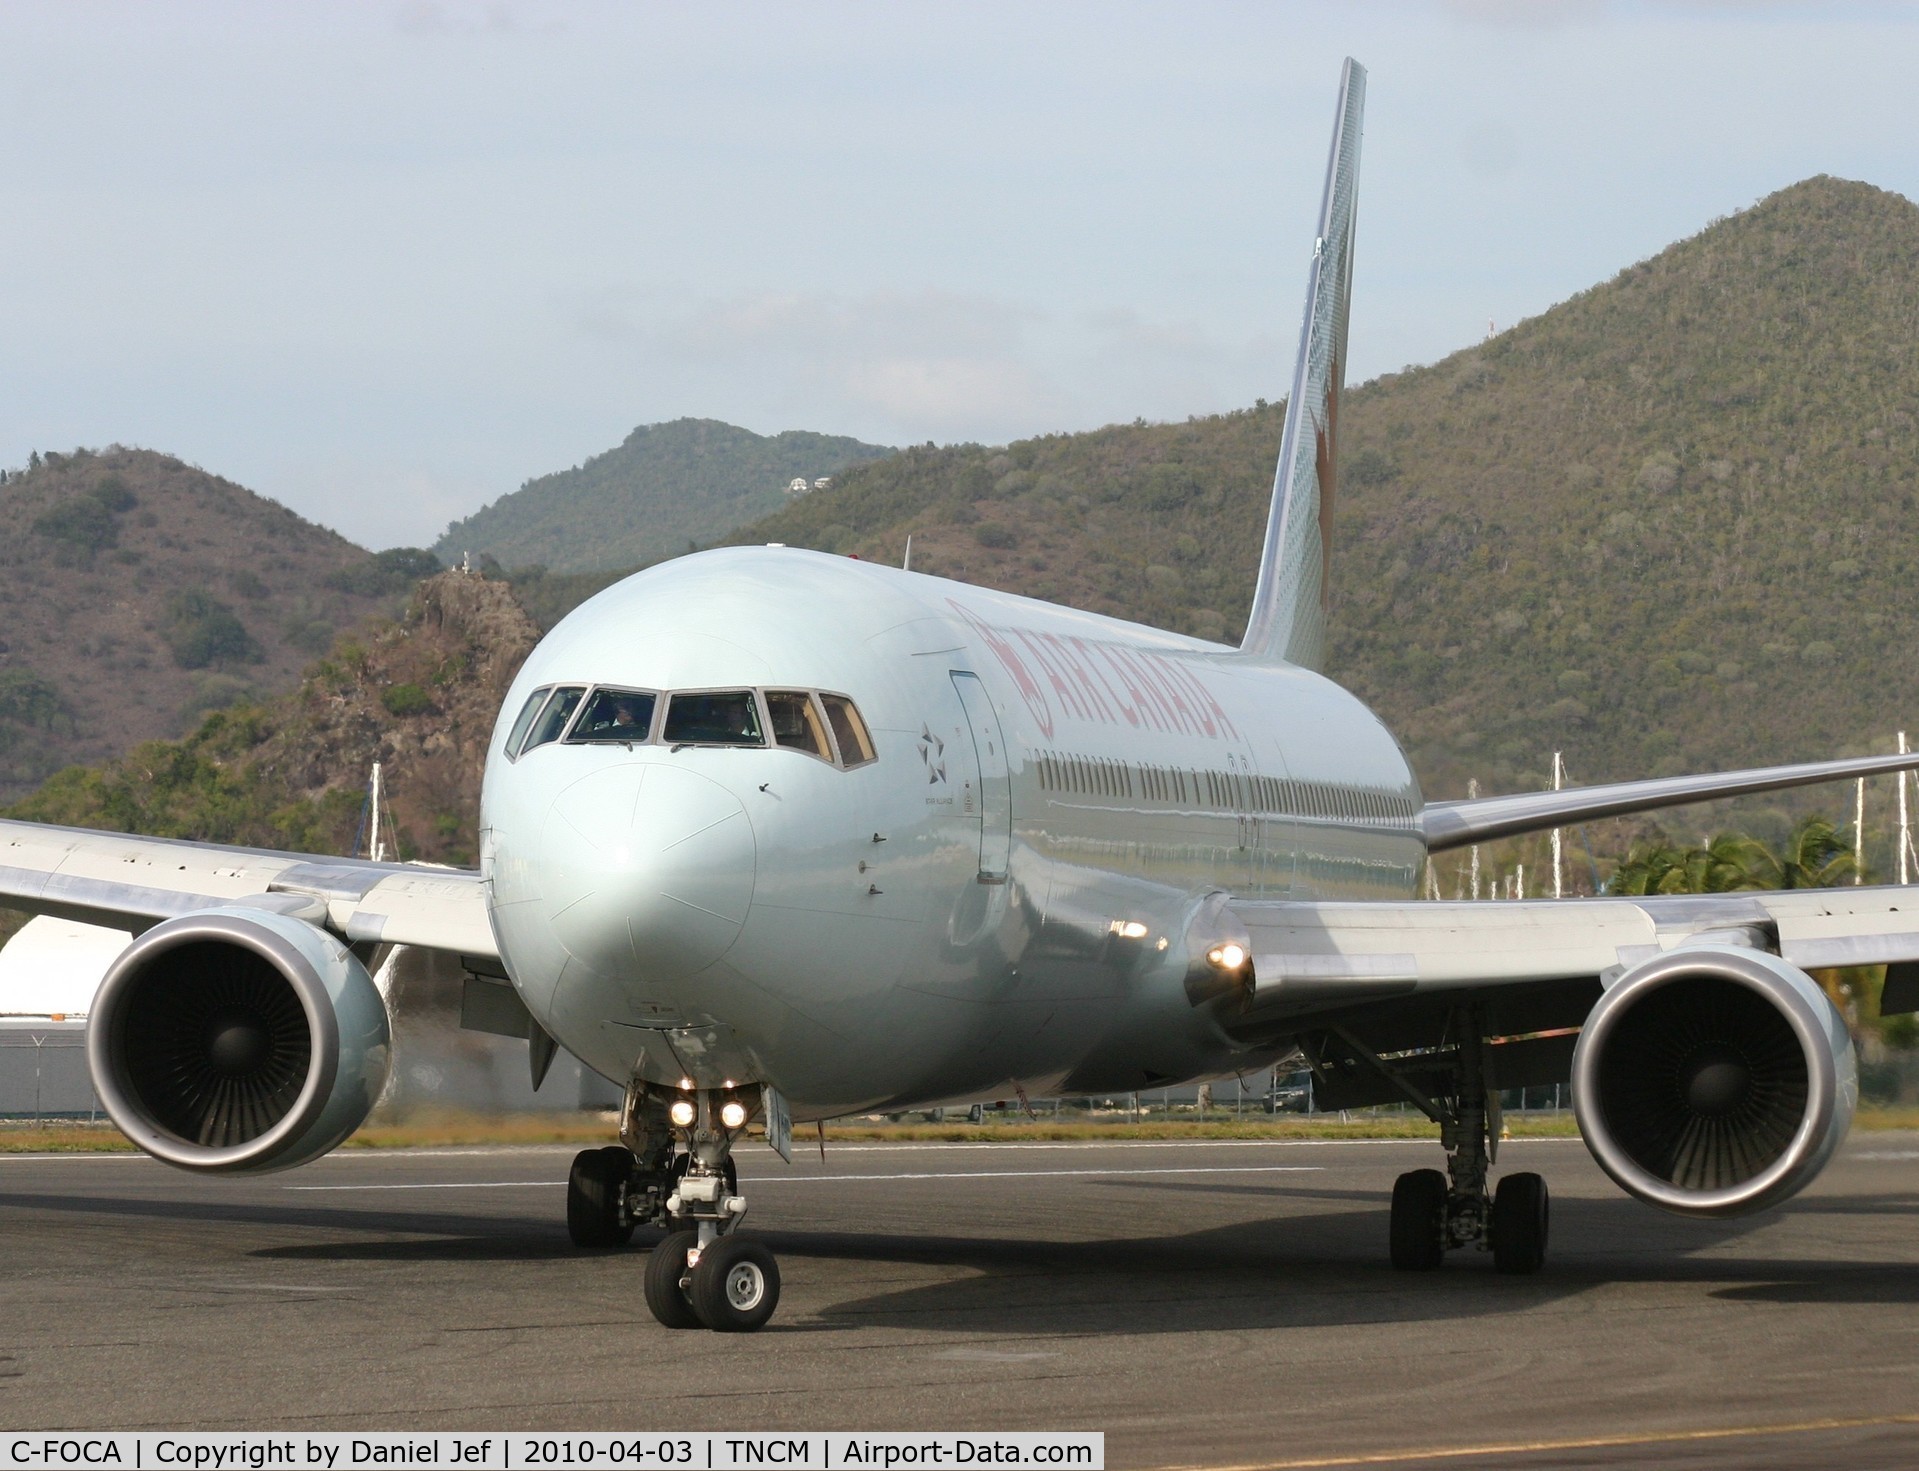 C-FOCA, 1990 Boeing 767-375/ER C/N 24575, Air canada turning around on the active for parking